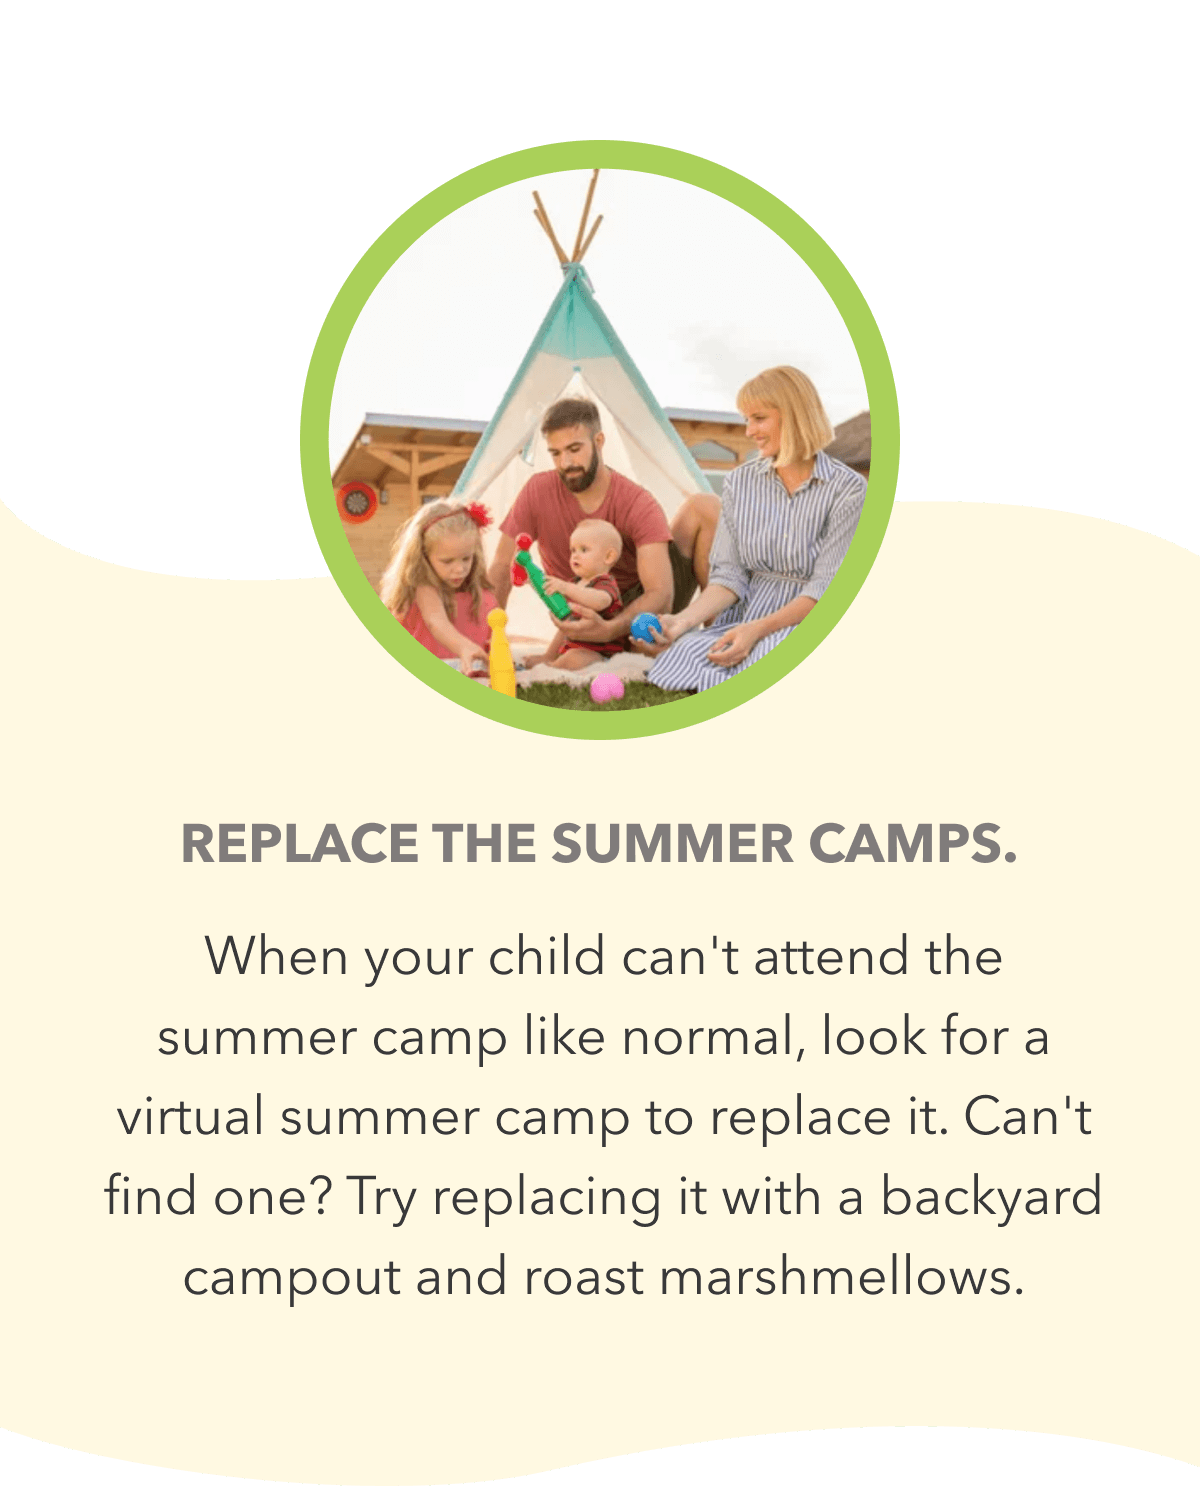 Replace the summer camps. When your child can't attend the summer camp like normal, look for a virtual summer camp to replace it. Can't find one? Try replacing it with a backyard campout and roast marshmellows.